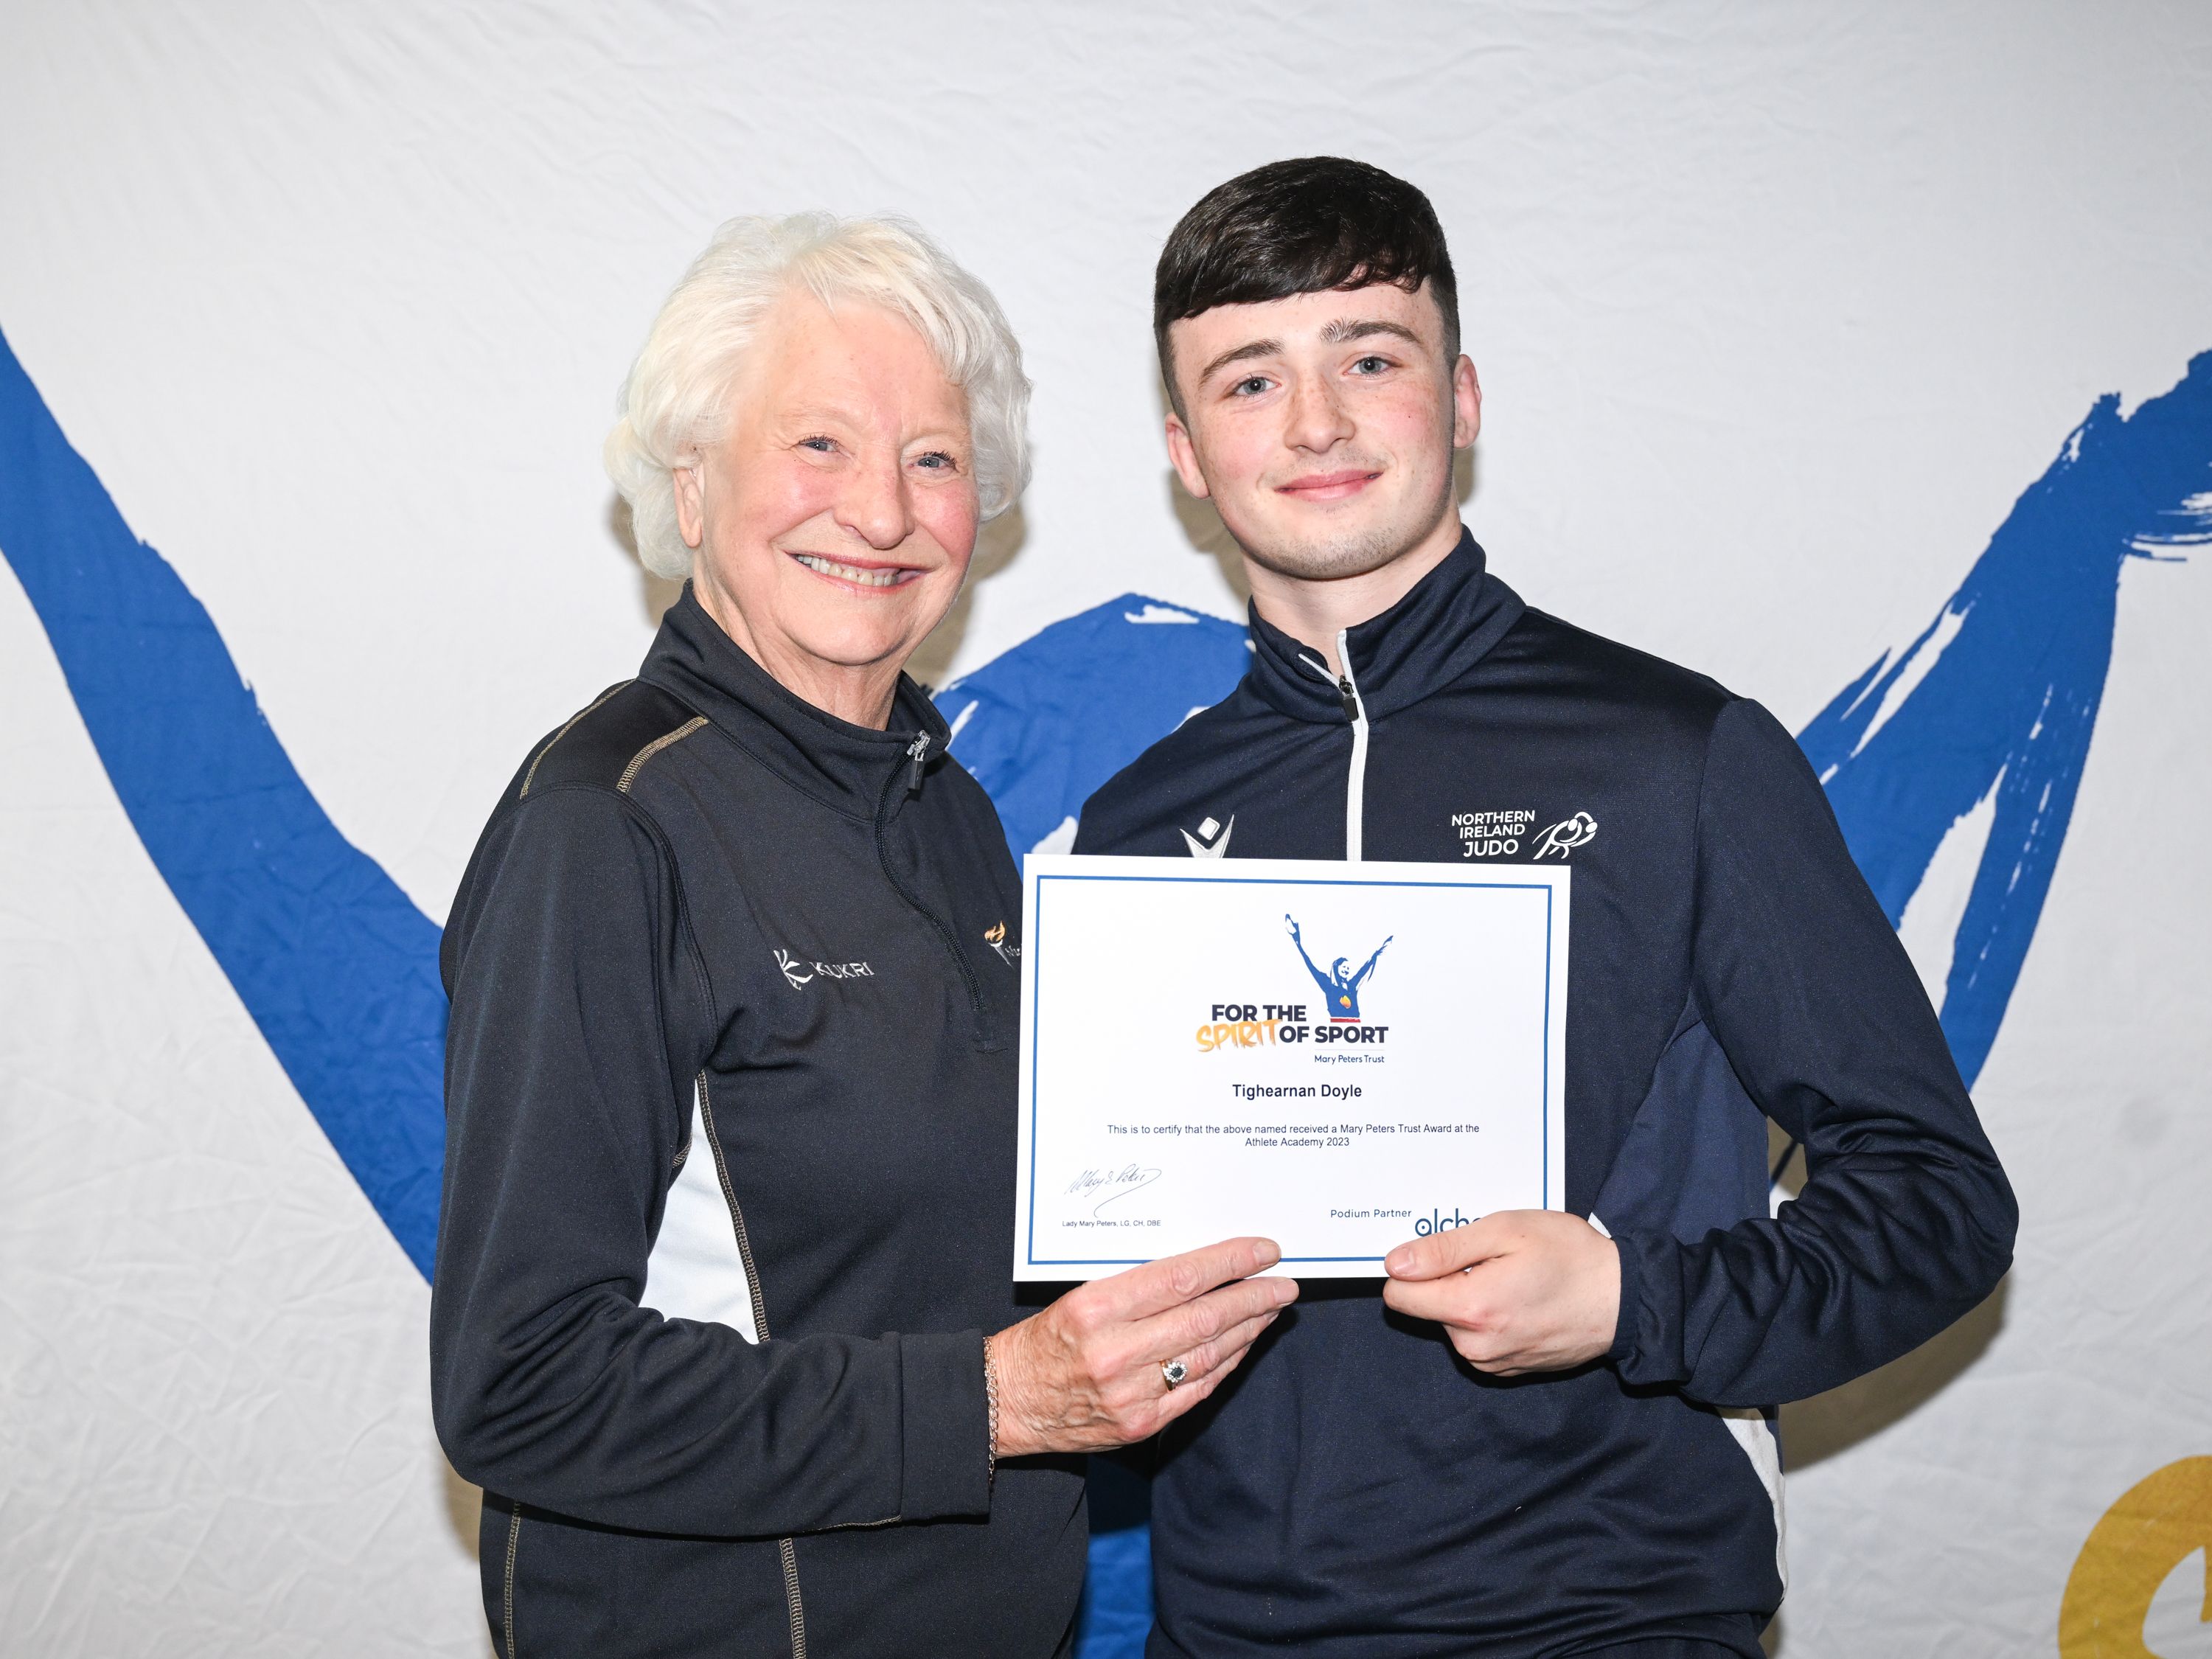 Tighearnan Doyle is presented with his award by Mary Peters